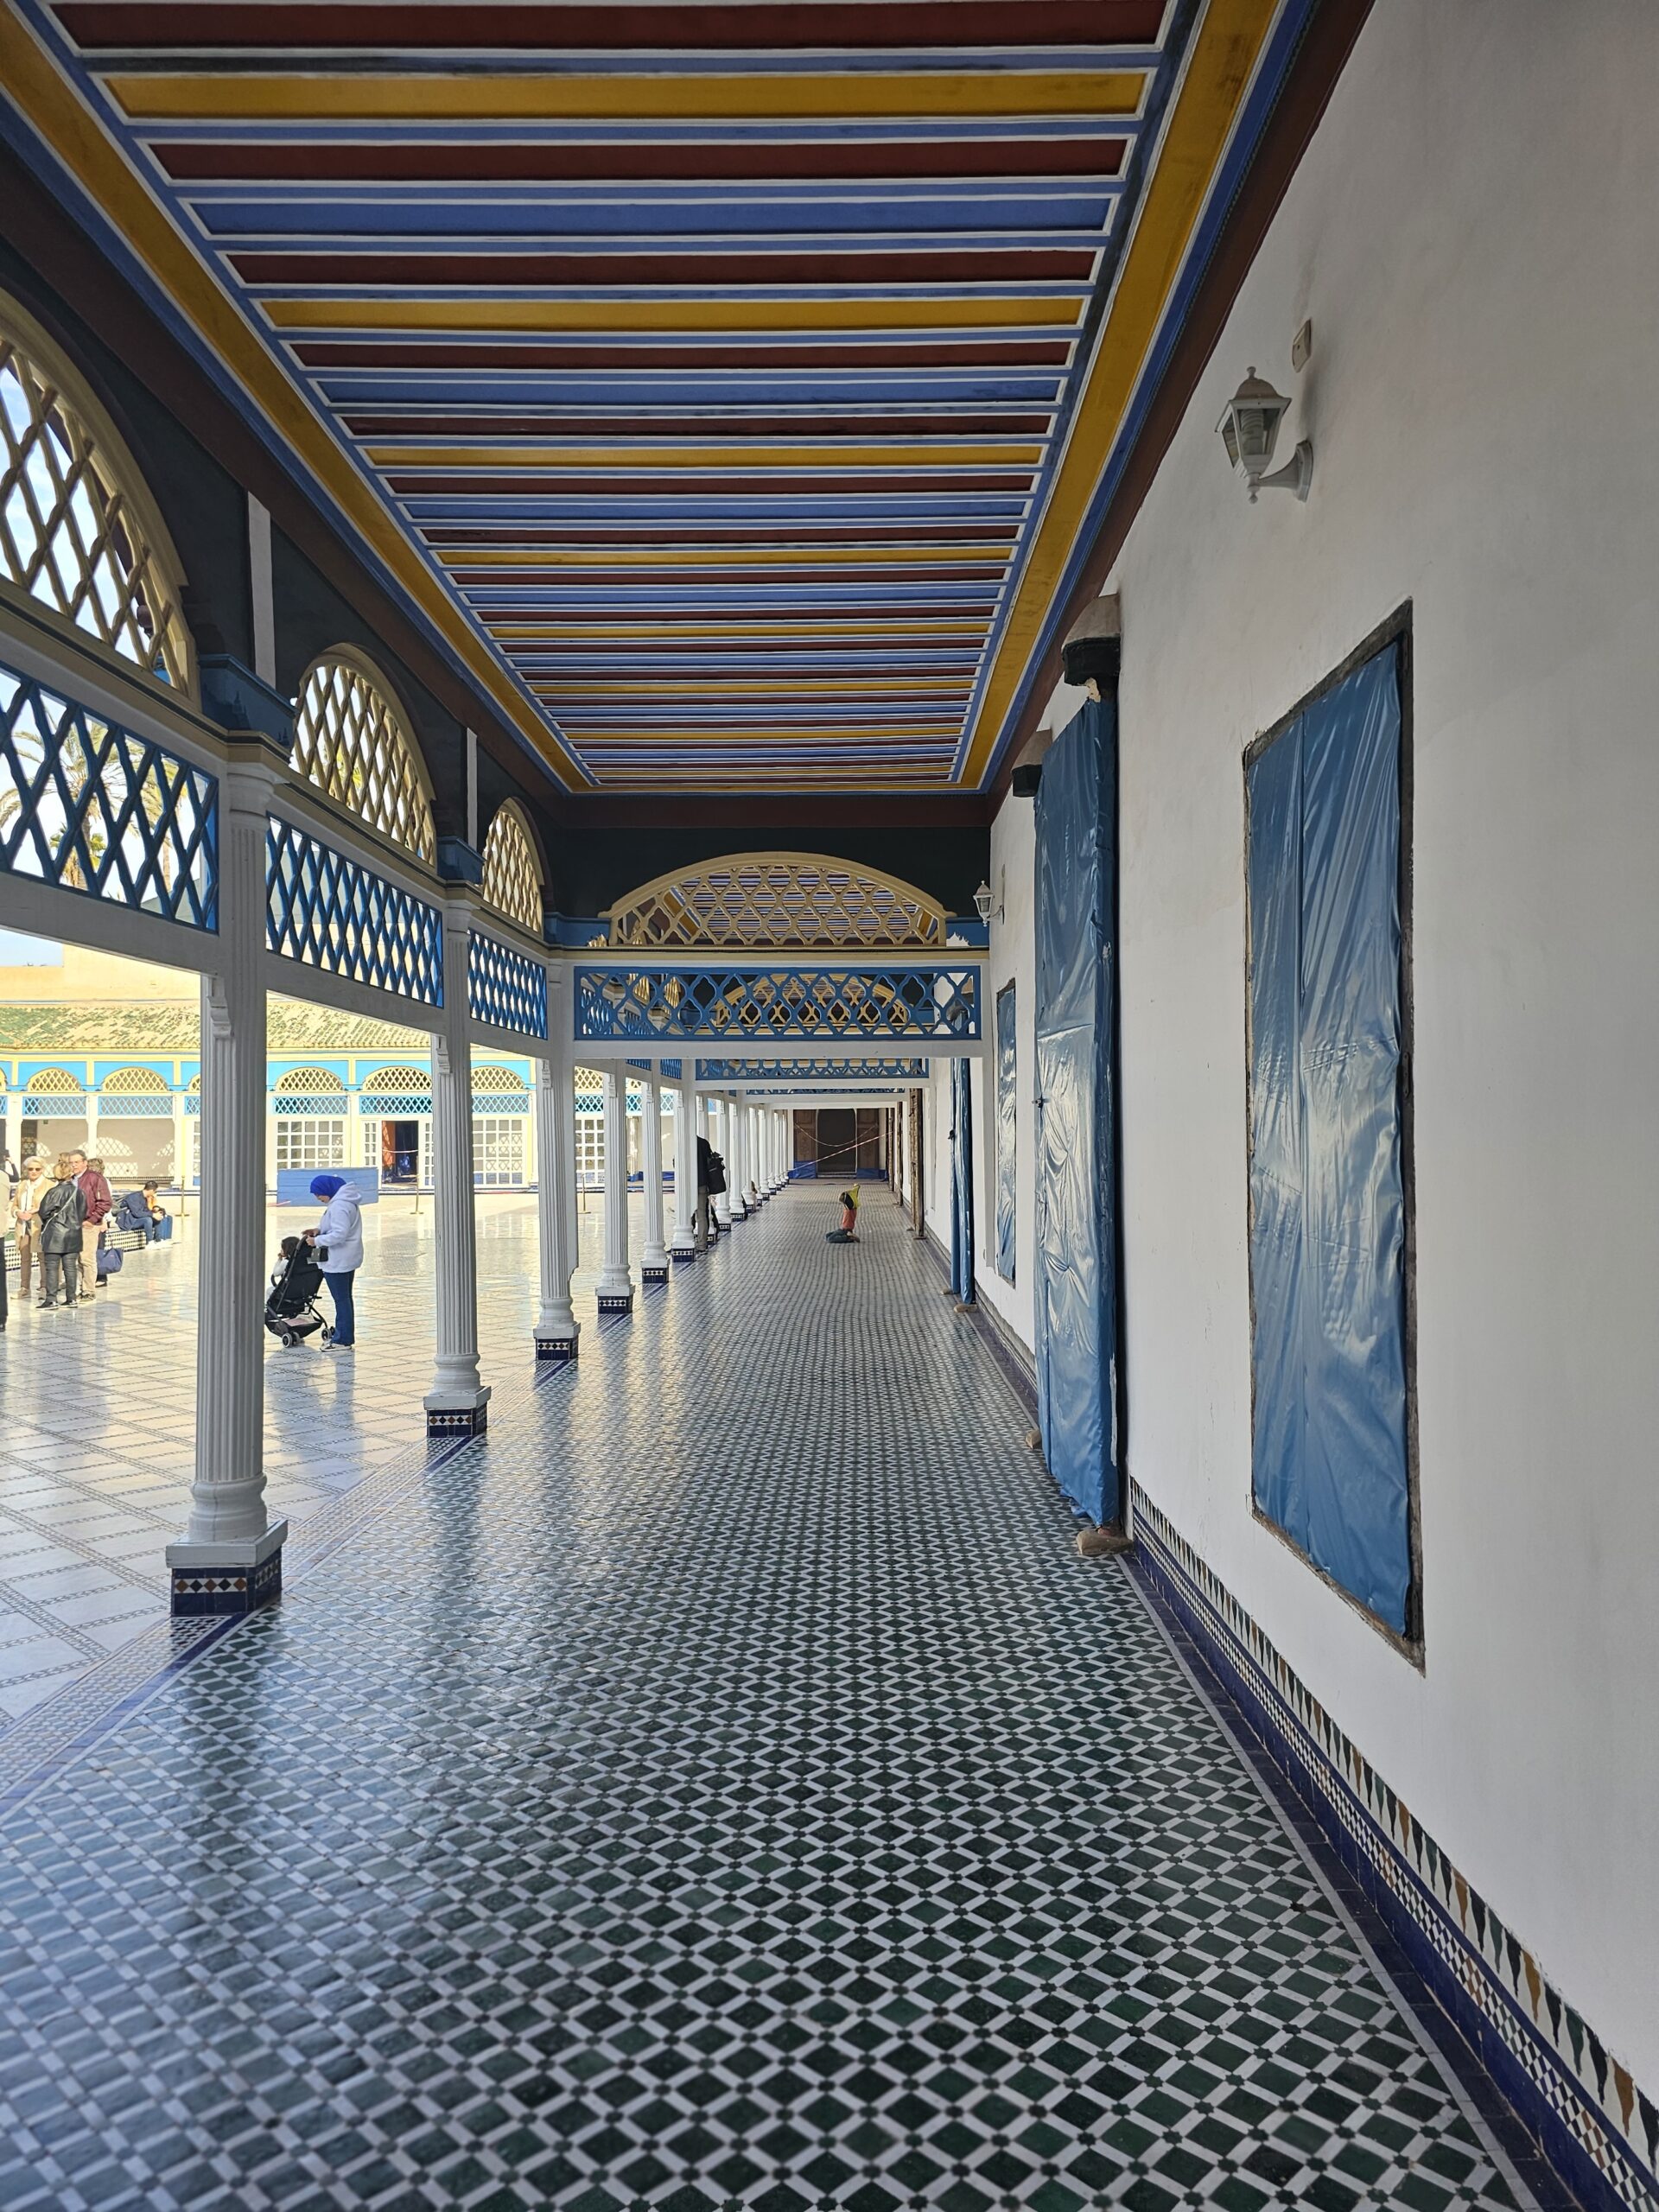 A corridor with circular columns that goes around the central courtyard of Bahia Palace, Marrakesh. Iamge by 360onhistory.com